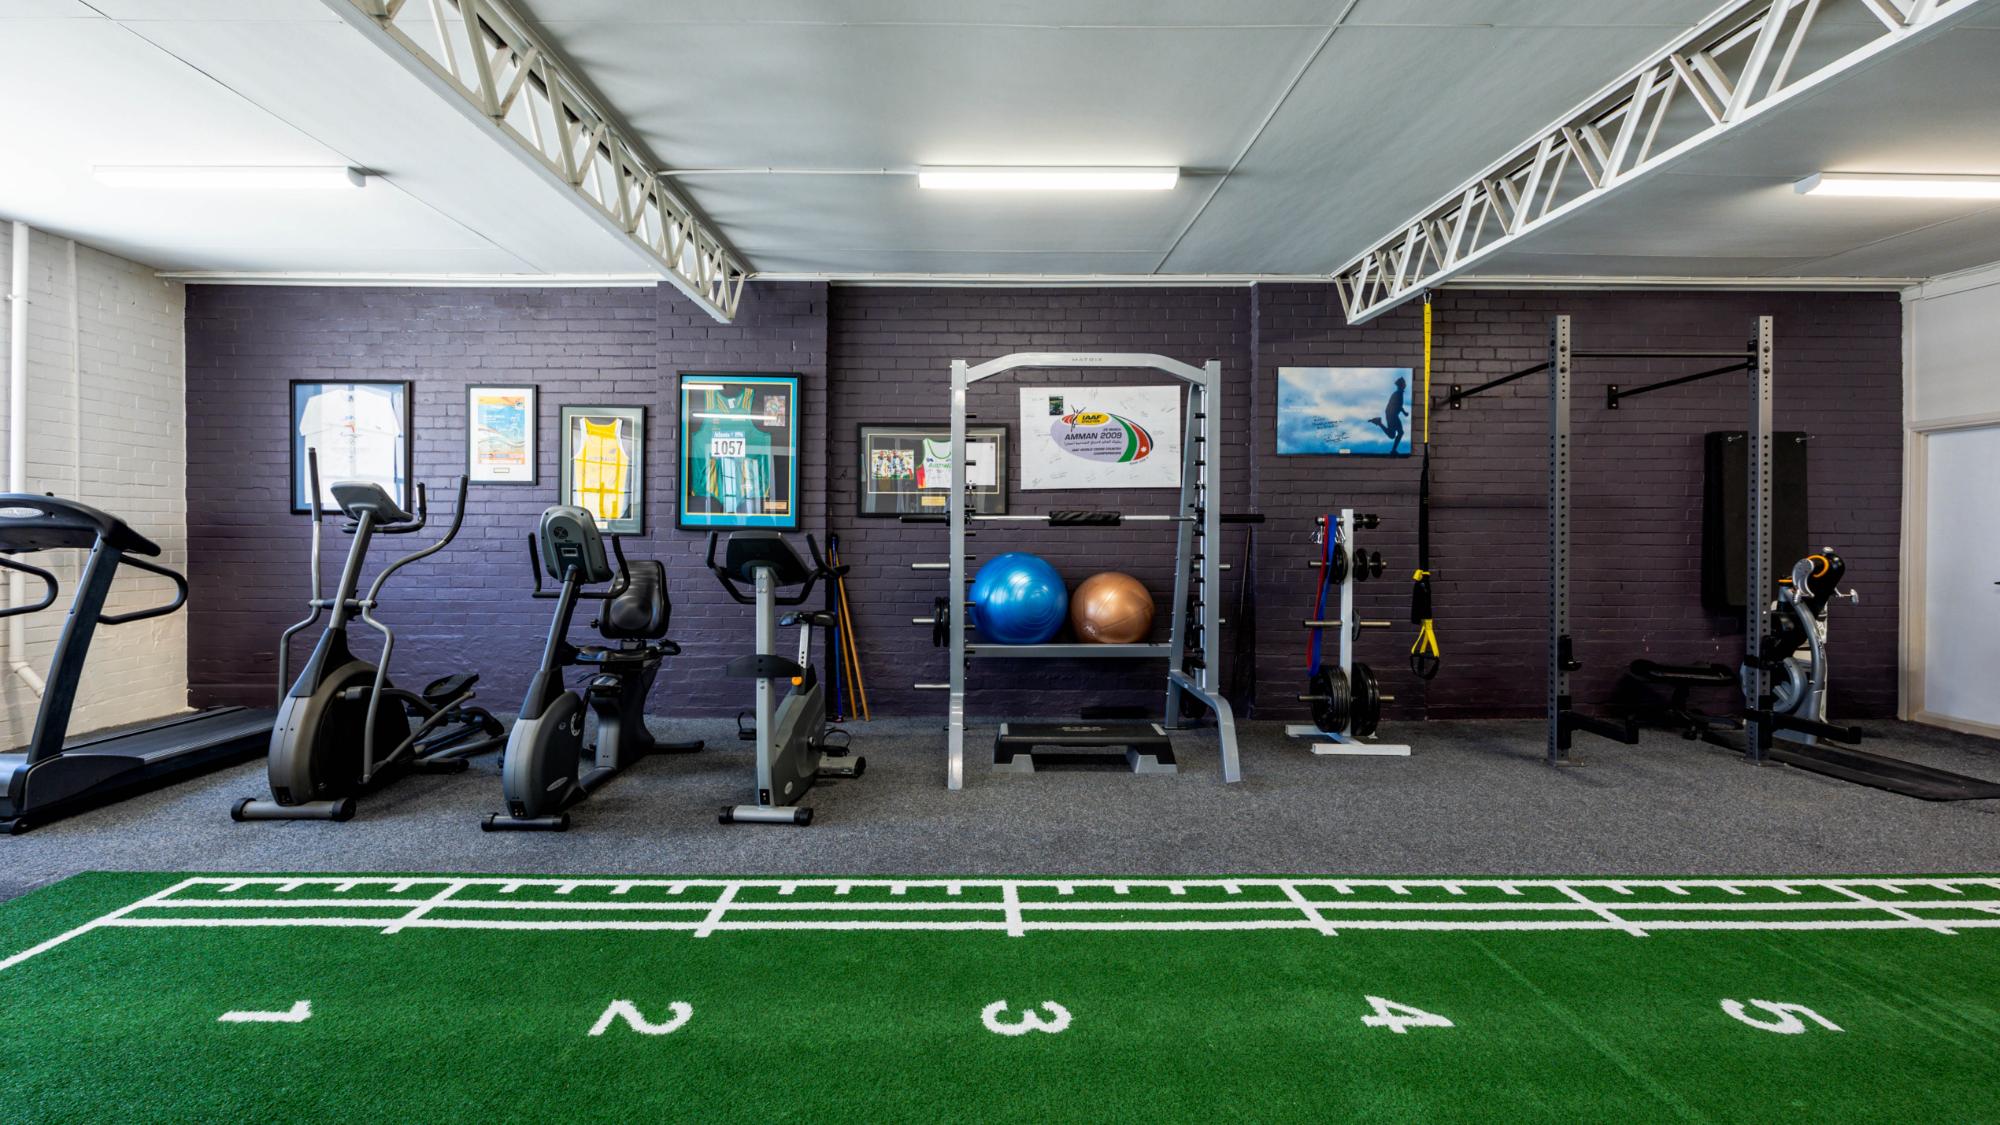 A gym with a sprint or jumping track in the middle, and cardio, strength, and other gym equipment at the back with a dark grey wall and white ceiling.